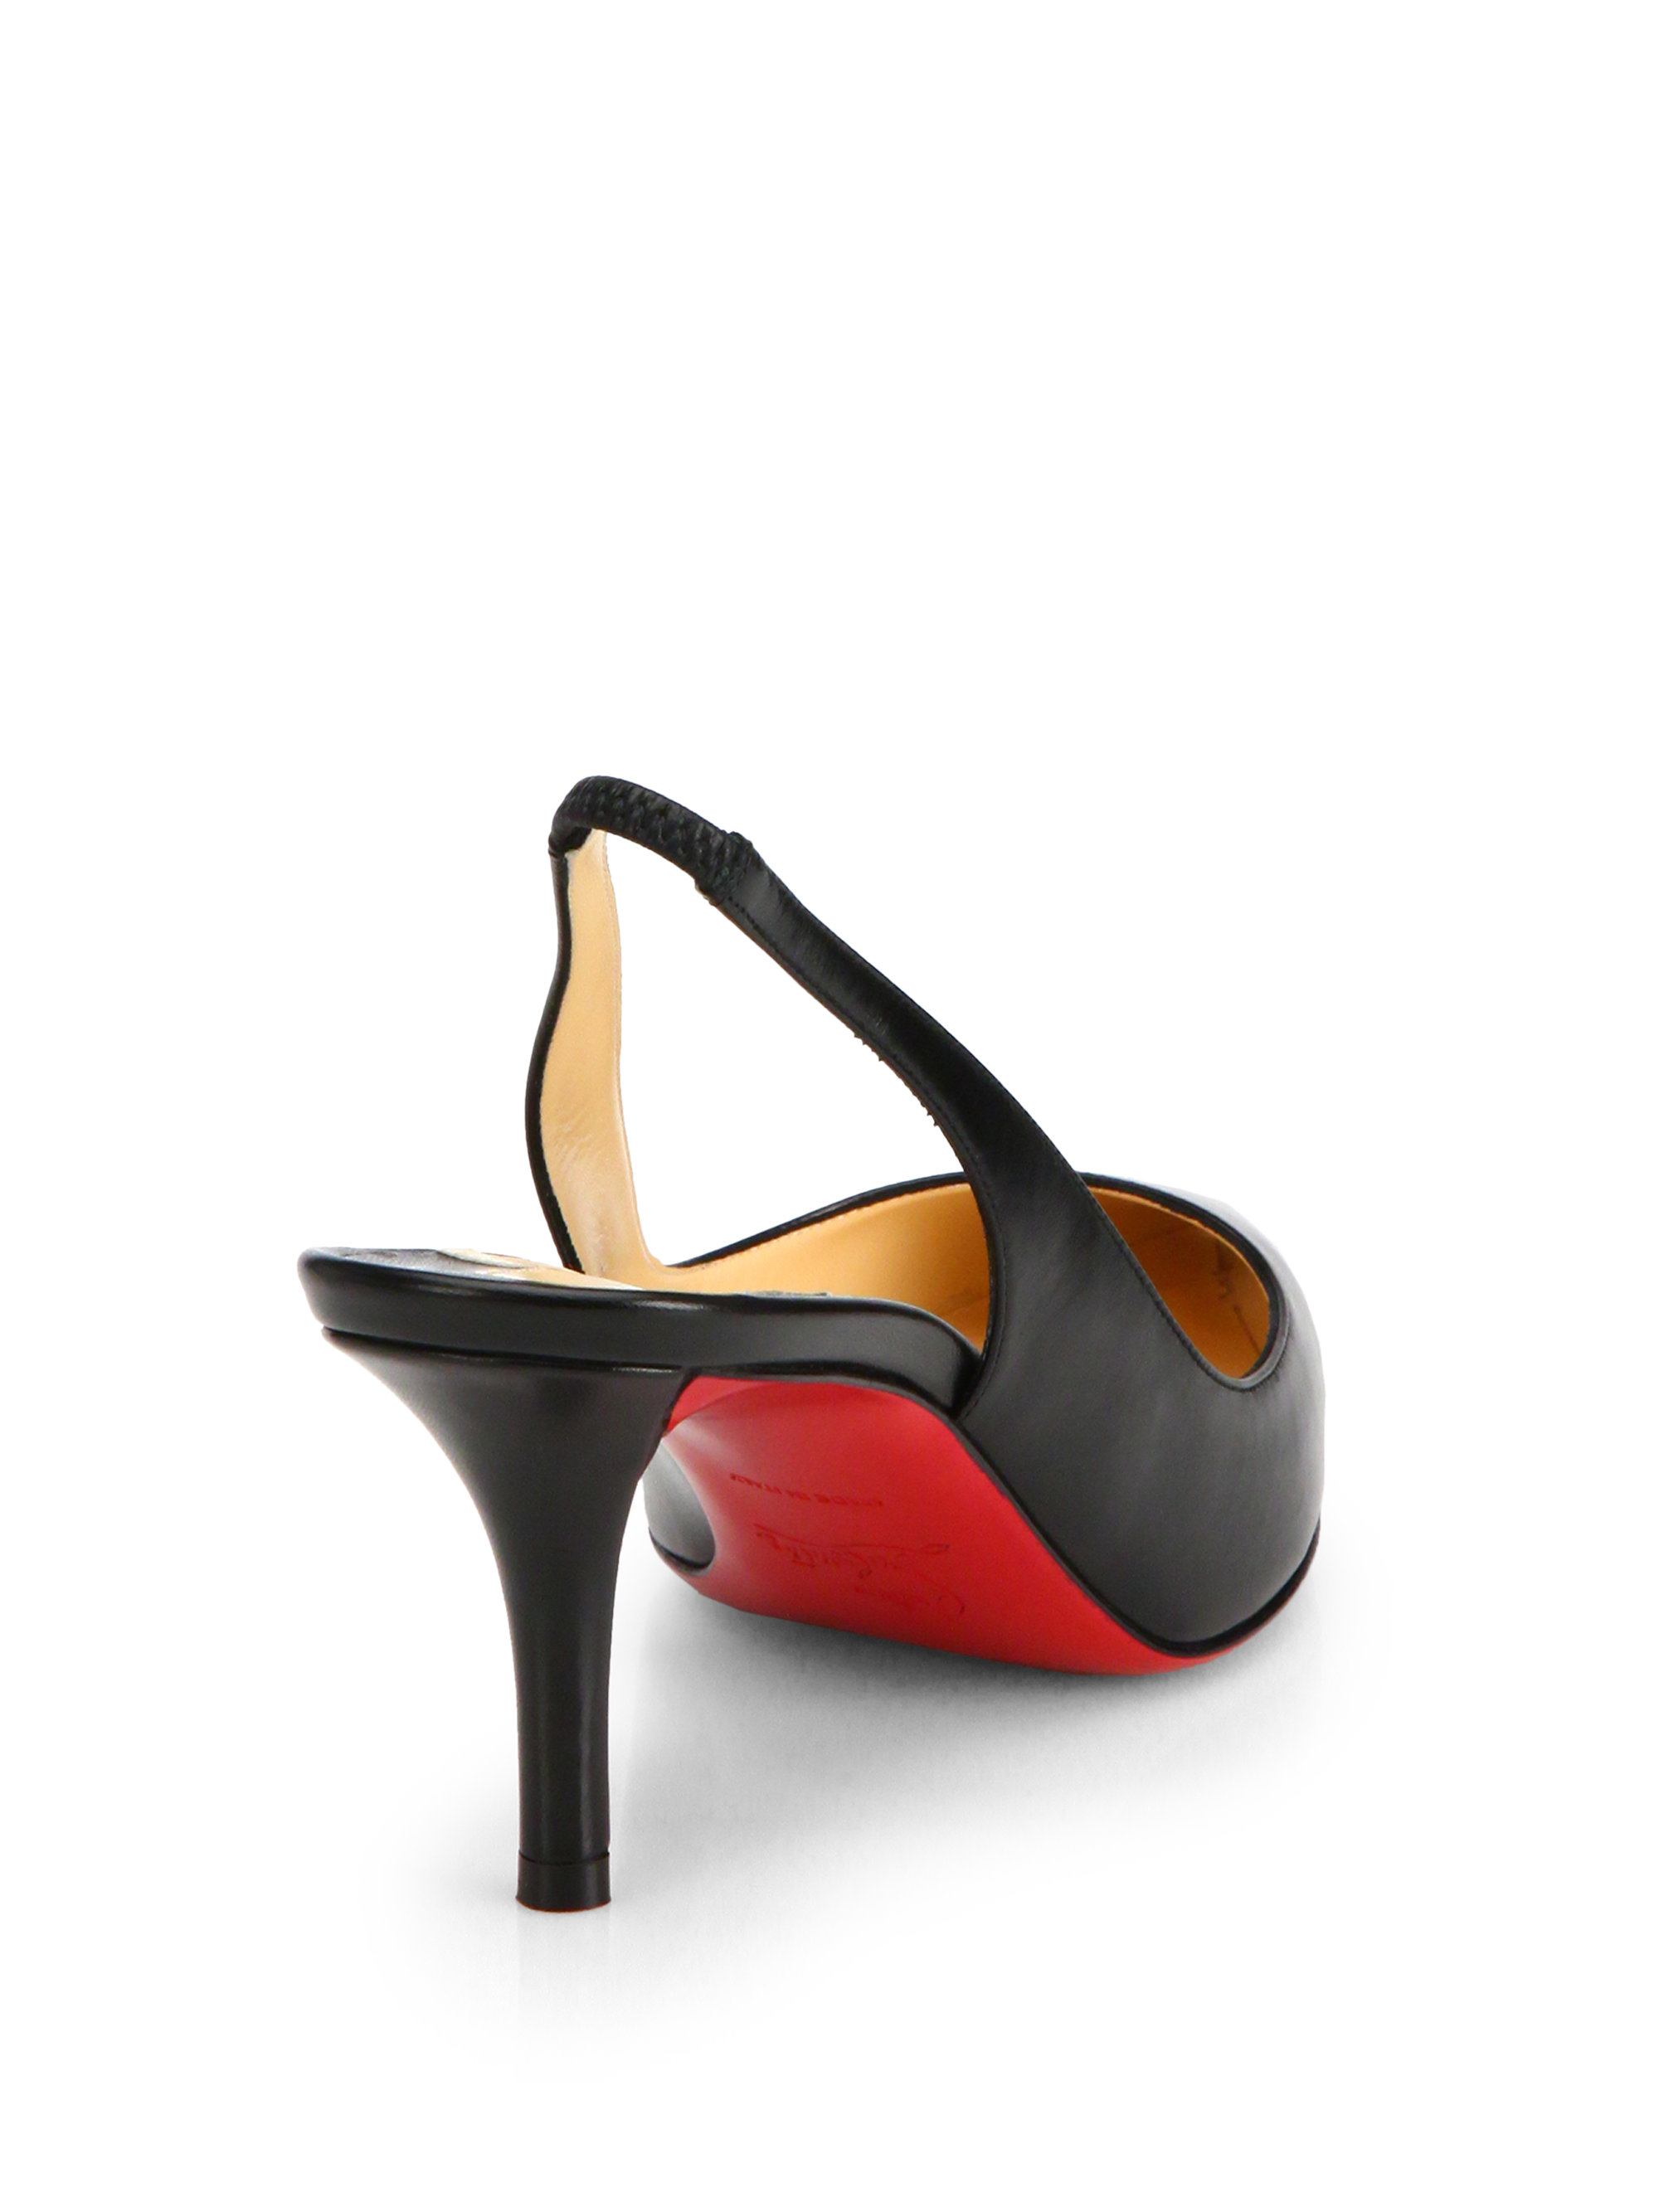 Christian Louboutin Apostrophy Leather Slingback Pumps in Black - Lyst